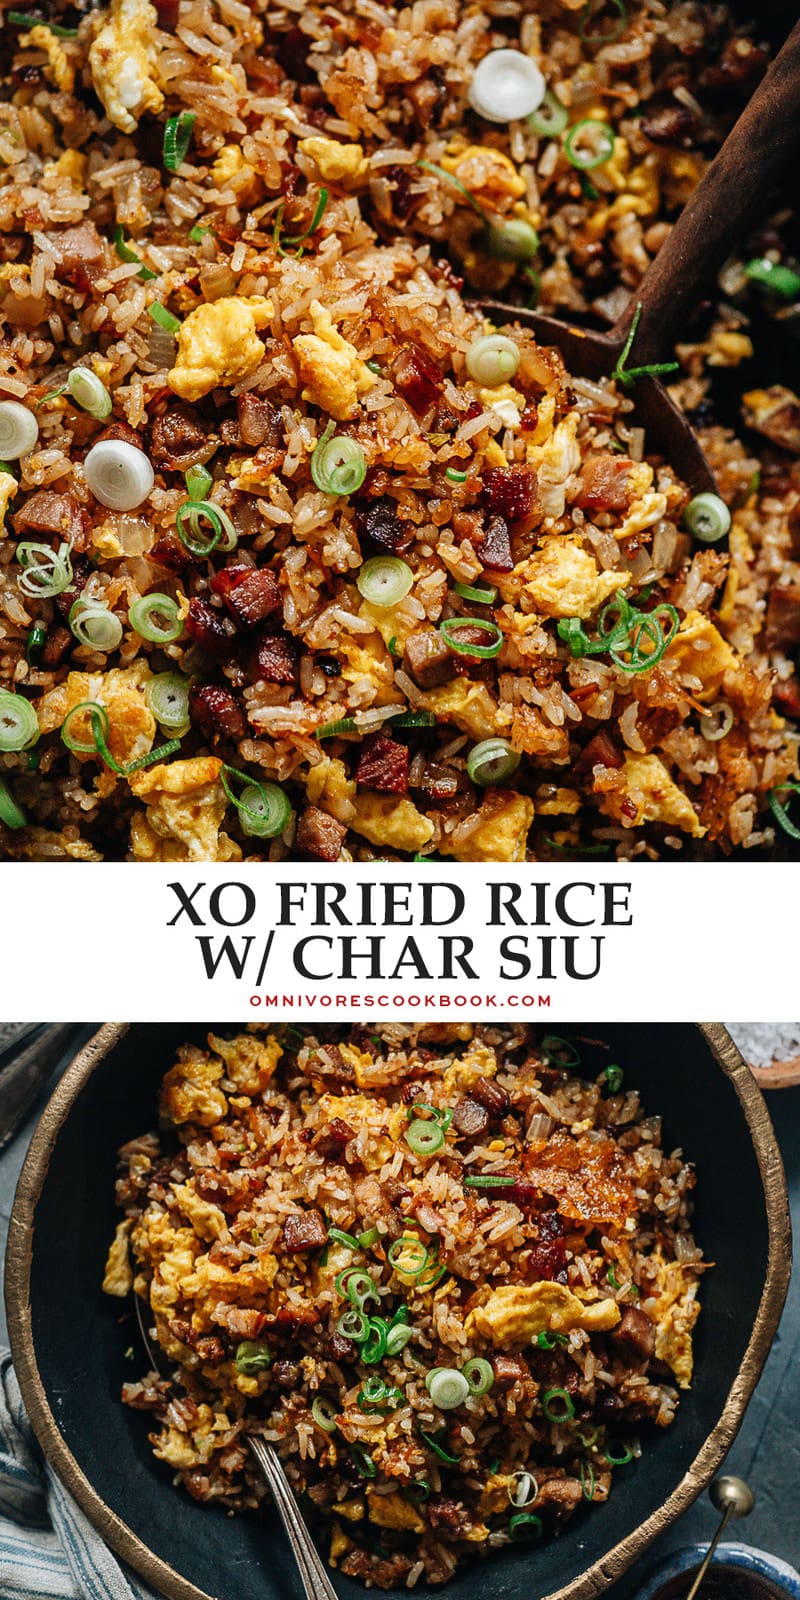 Dig into a bowl of XO fried rice with a crispy, crunchy texture and savory sweet, lightly seafoody taste that transforms your leftover char siu pork into a meal in minutes!